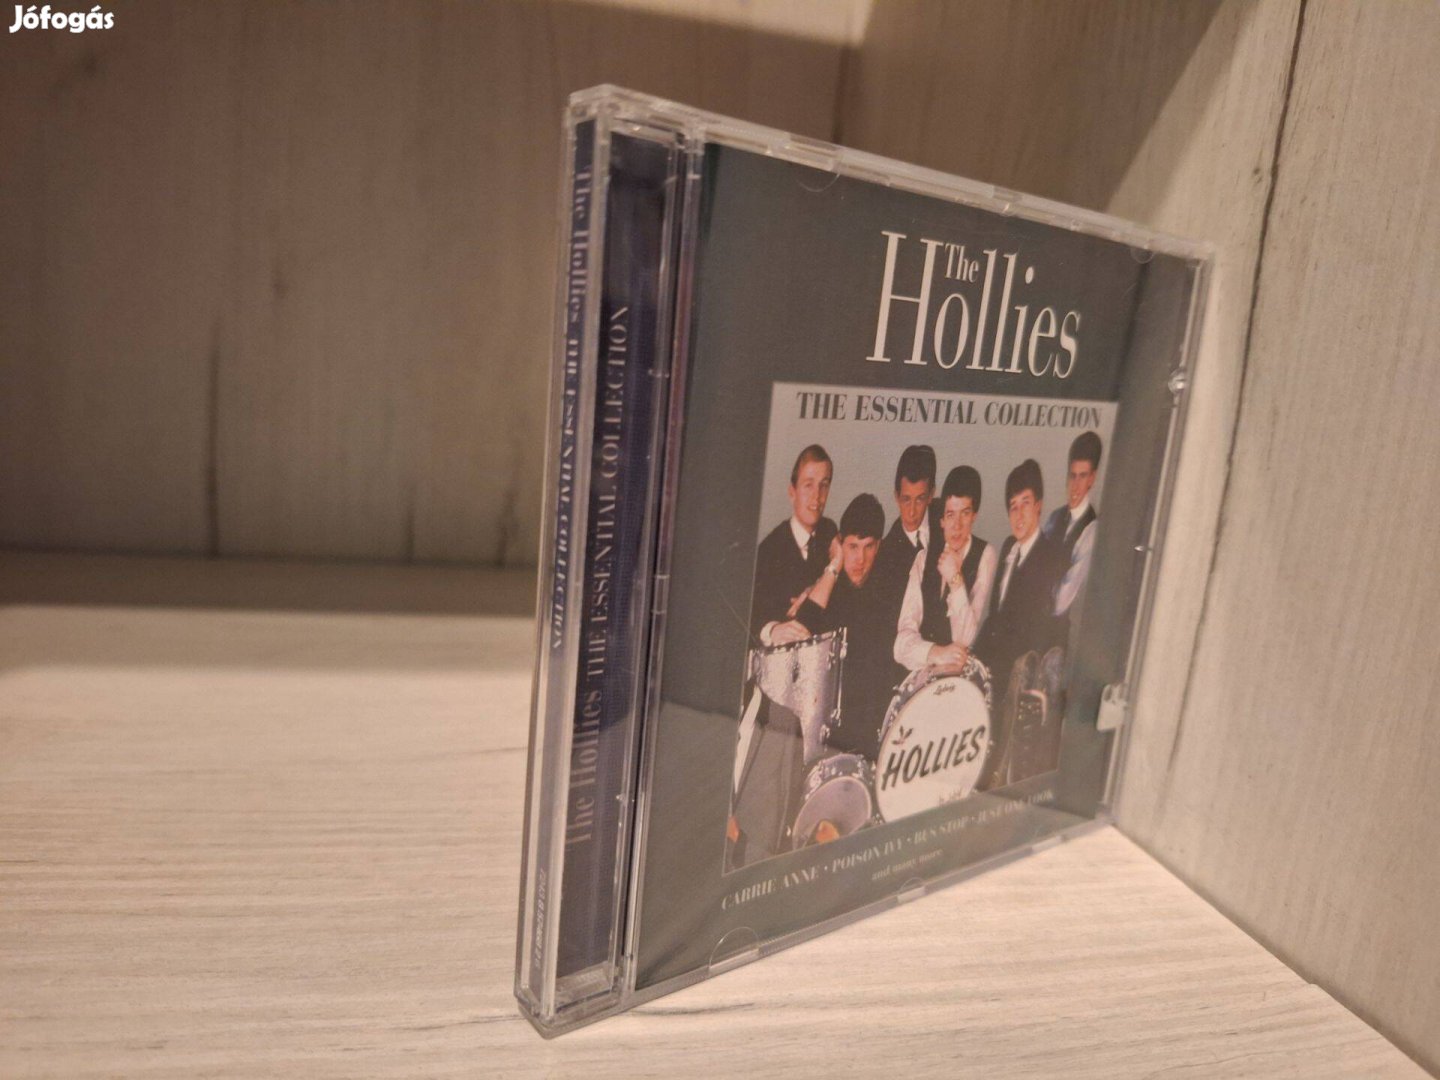 The Hollies - The Essential Collection CD